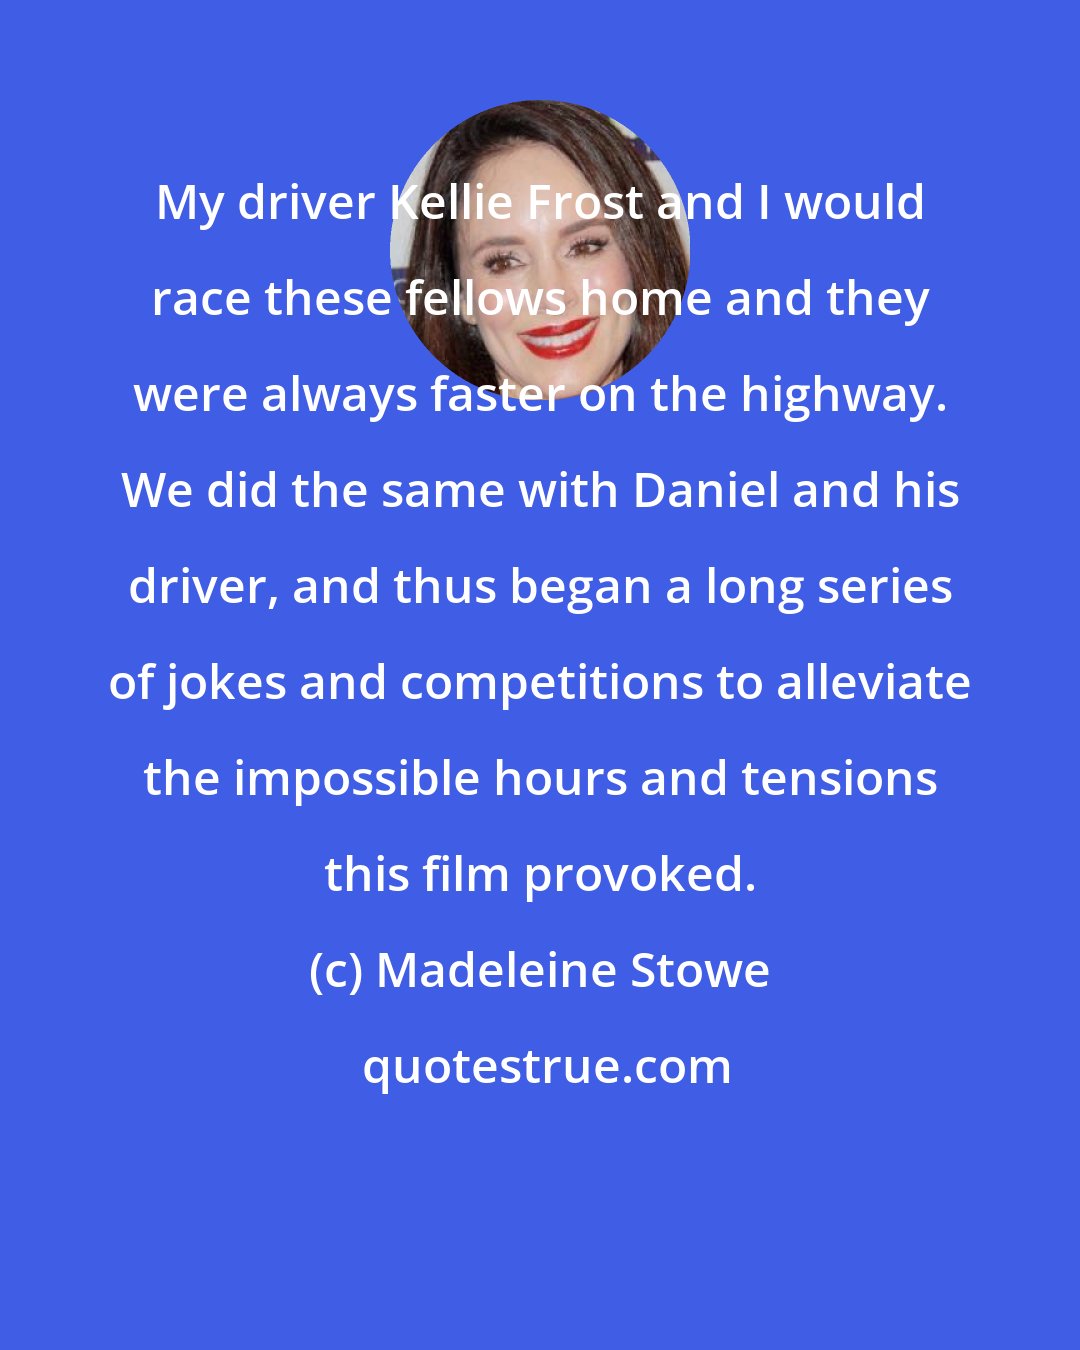 Madeleine Stowe: My driver Kellie Frost and I would race these fellows home and they were always faster on the highway. We did the same with Daniel and his driver, and thus began a long series of jokes and competitions to alleviate the impossible hours and tensions this film provoked.